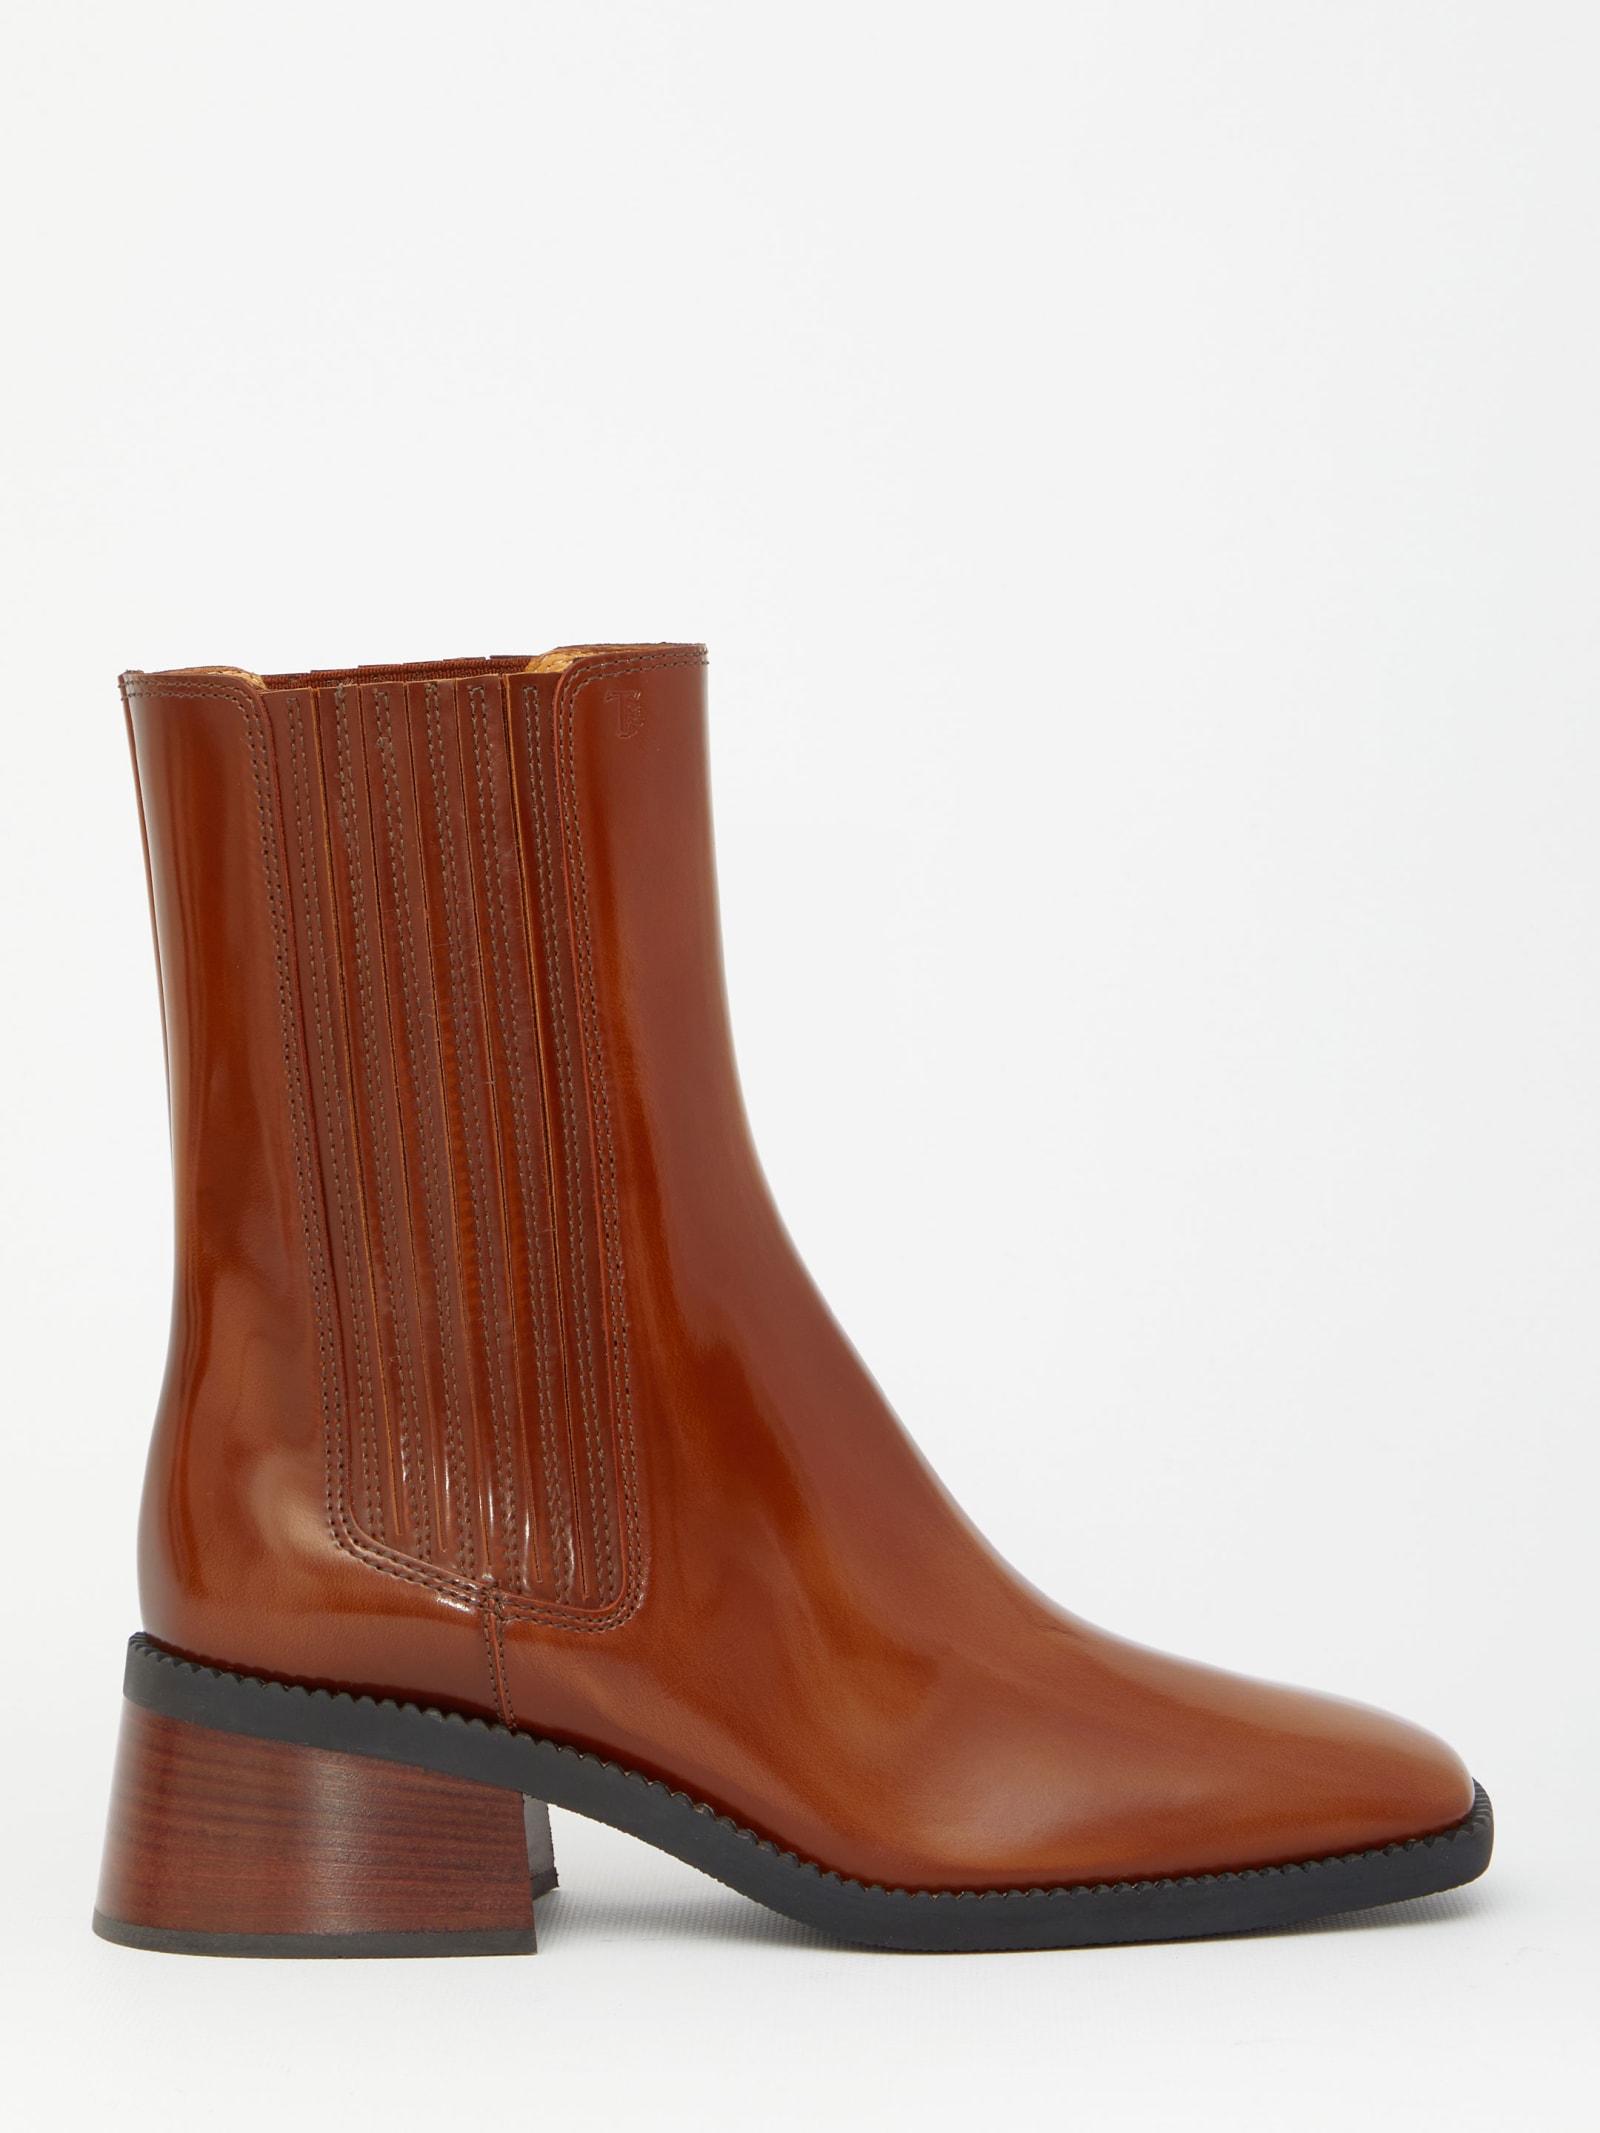 TOD'S BROWN LEATHER BOOTS